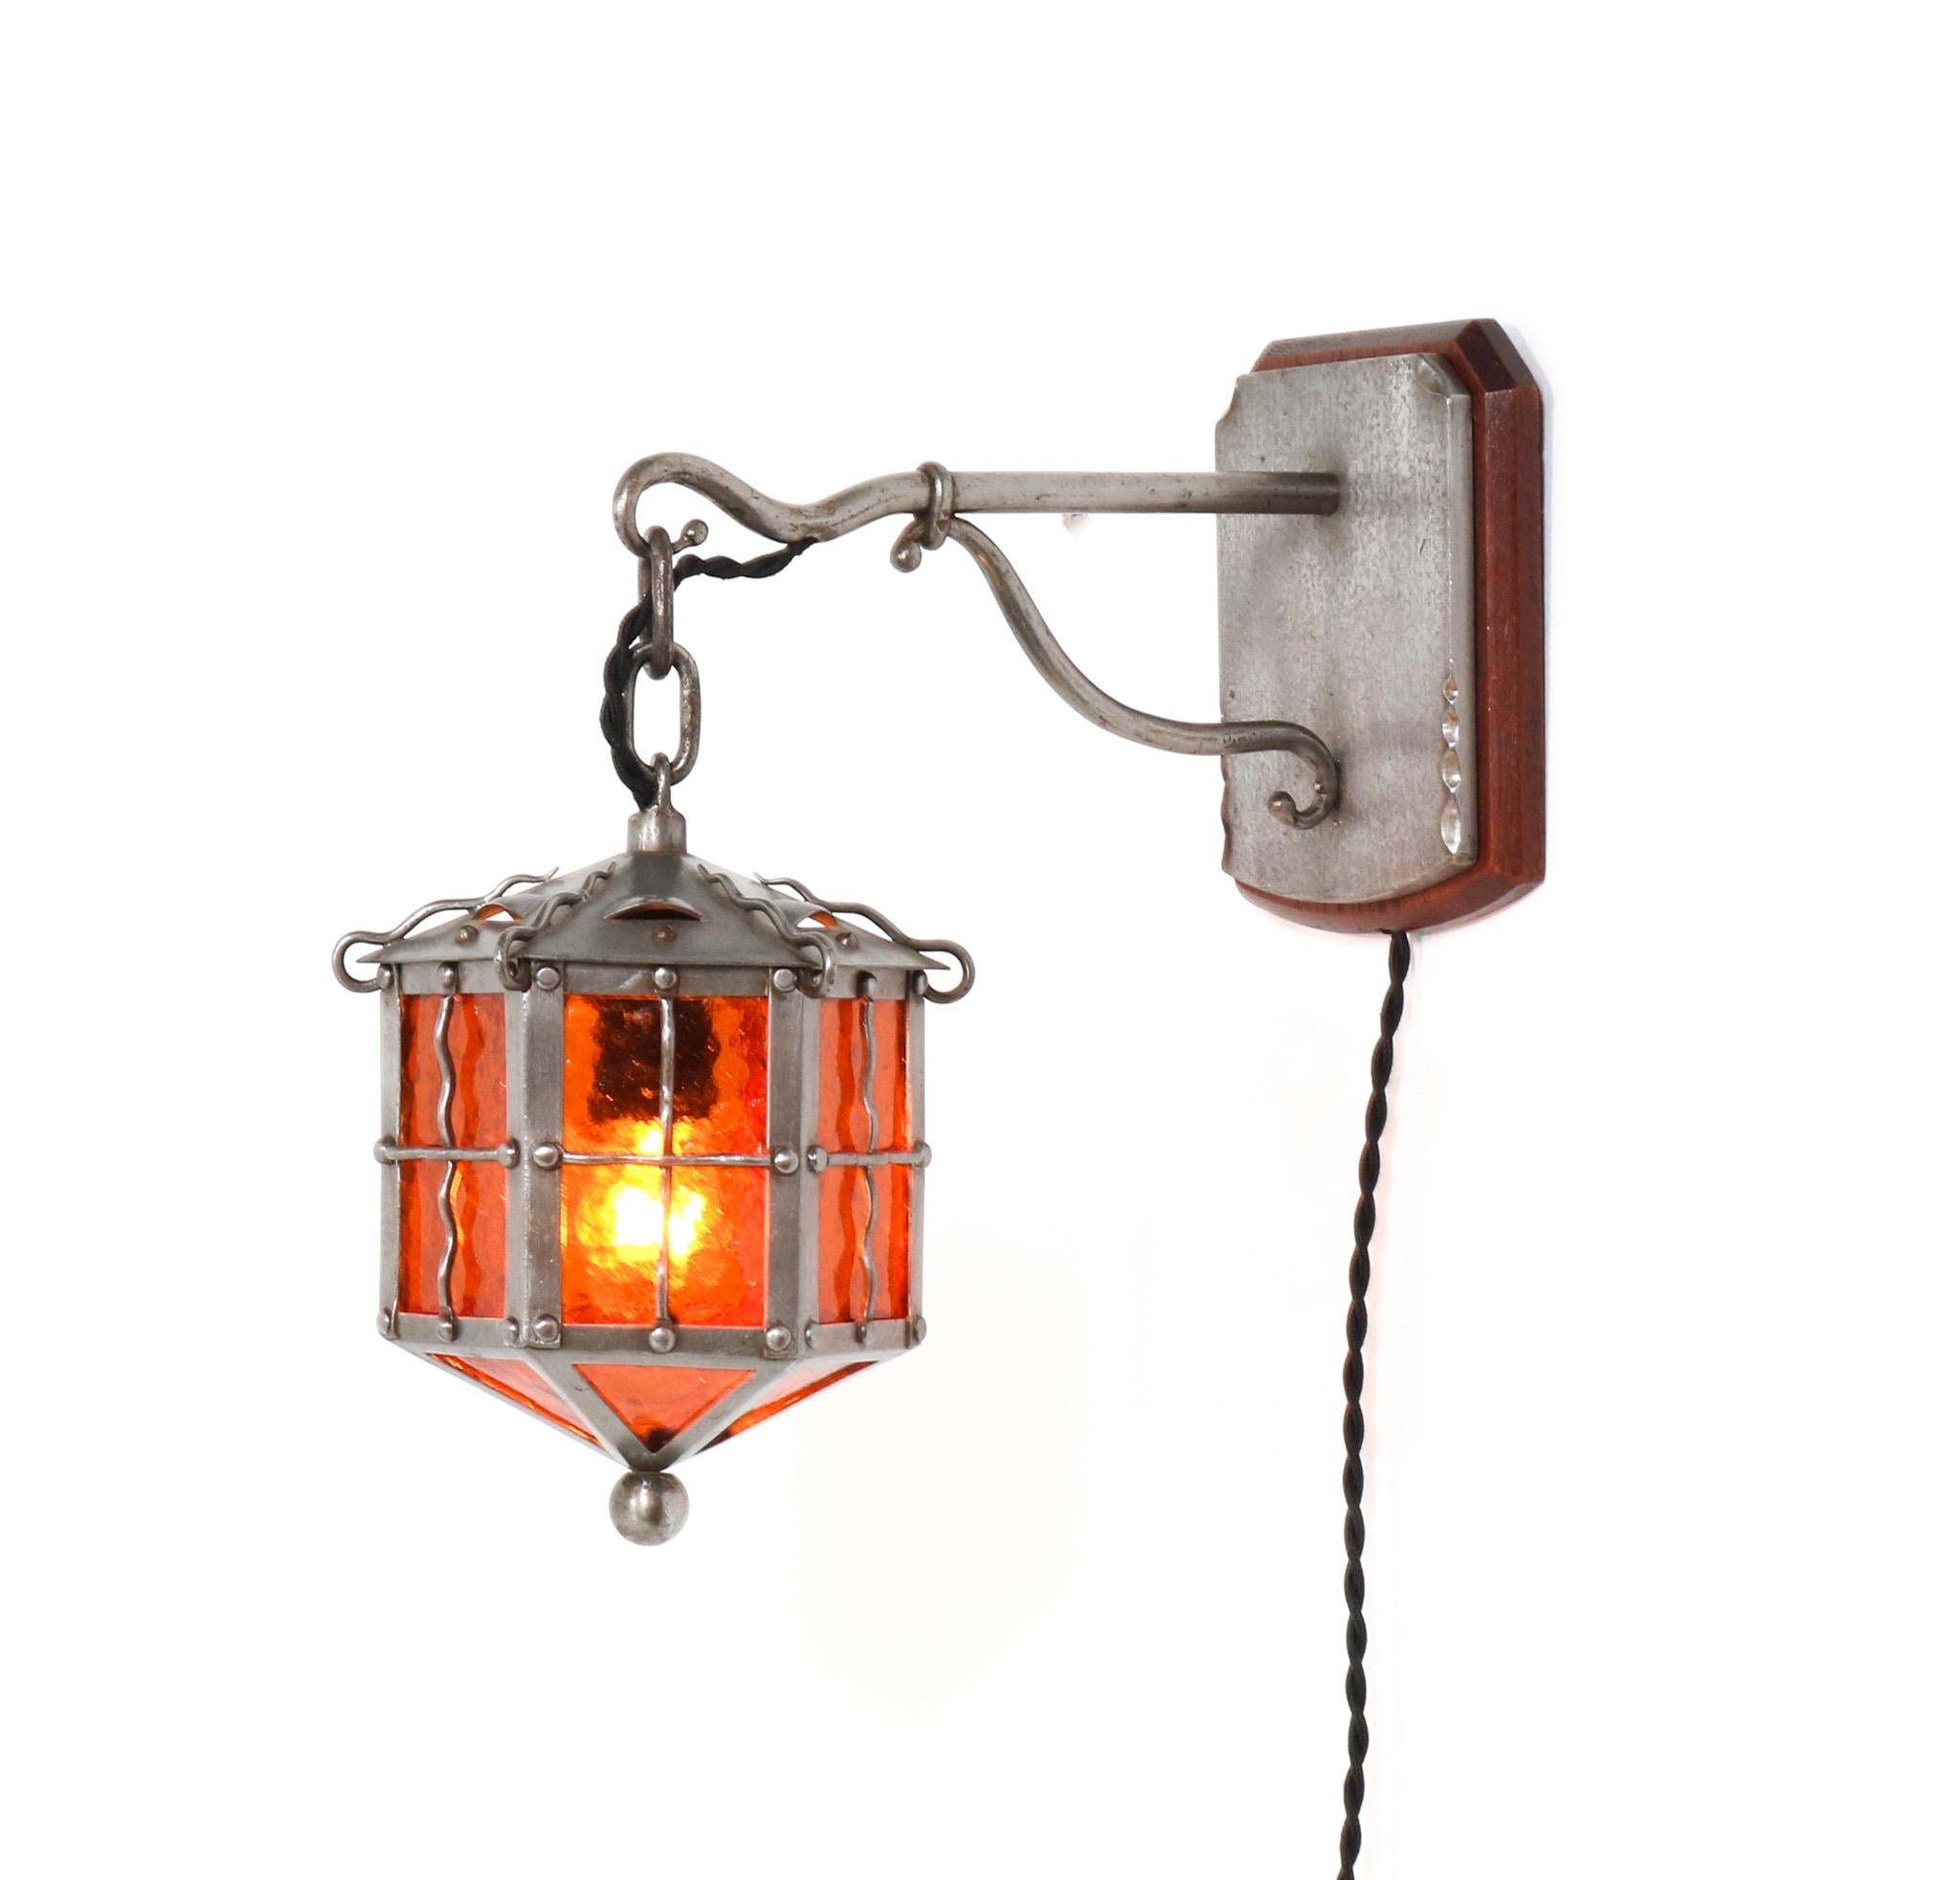 Stunning and rare Arts & Crafts wall light or sconce.
Striking Dutch design from the 1900s.
Original patinated wrought iron frame with original hand-blown glass.
Rewired with one original socket for E-27 light bulb.
This wonderful Arts & Crafts wall